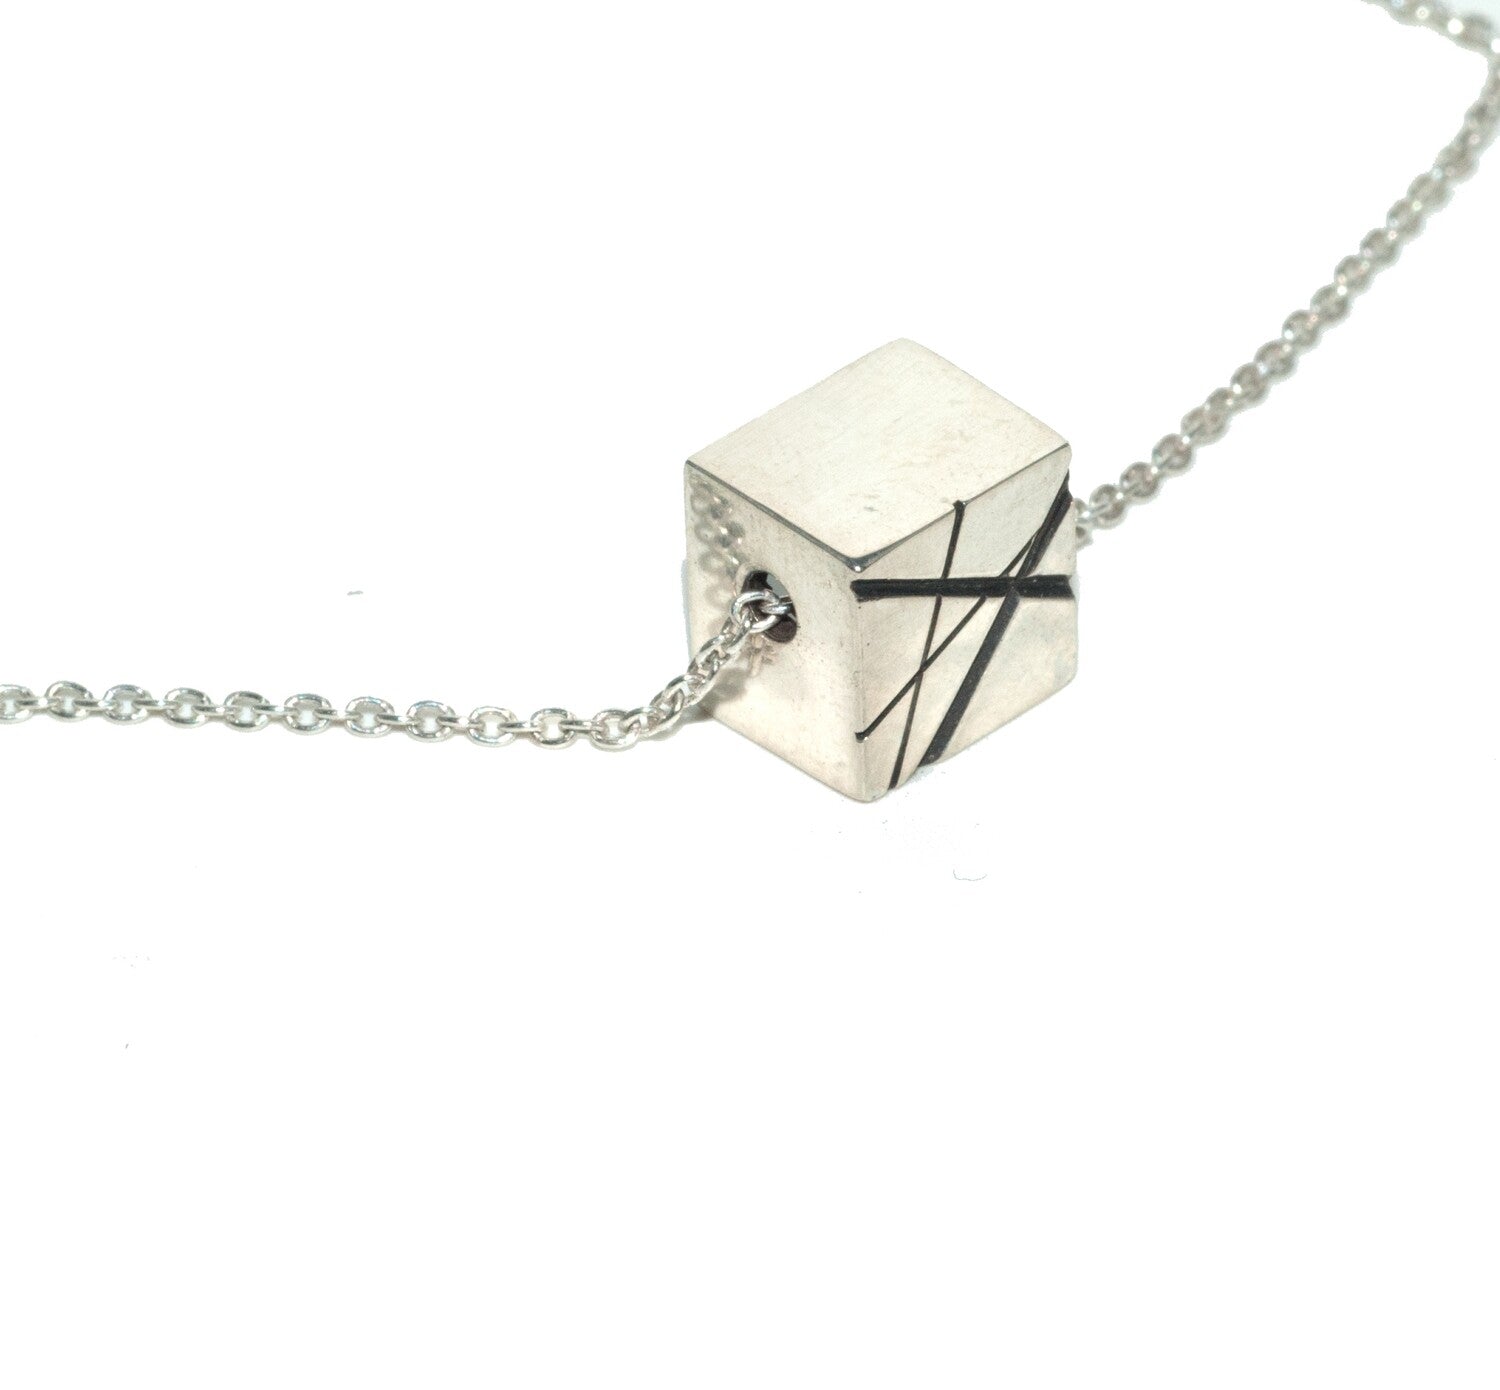 Cubed Land Lines Silver Pendant.